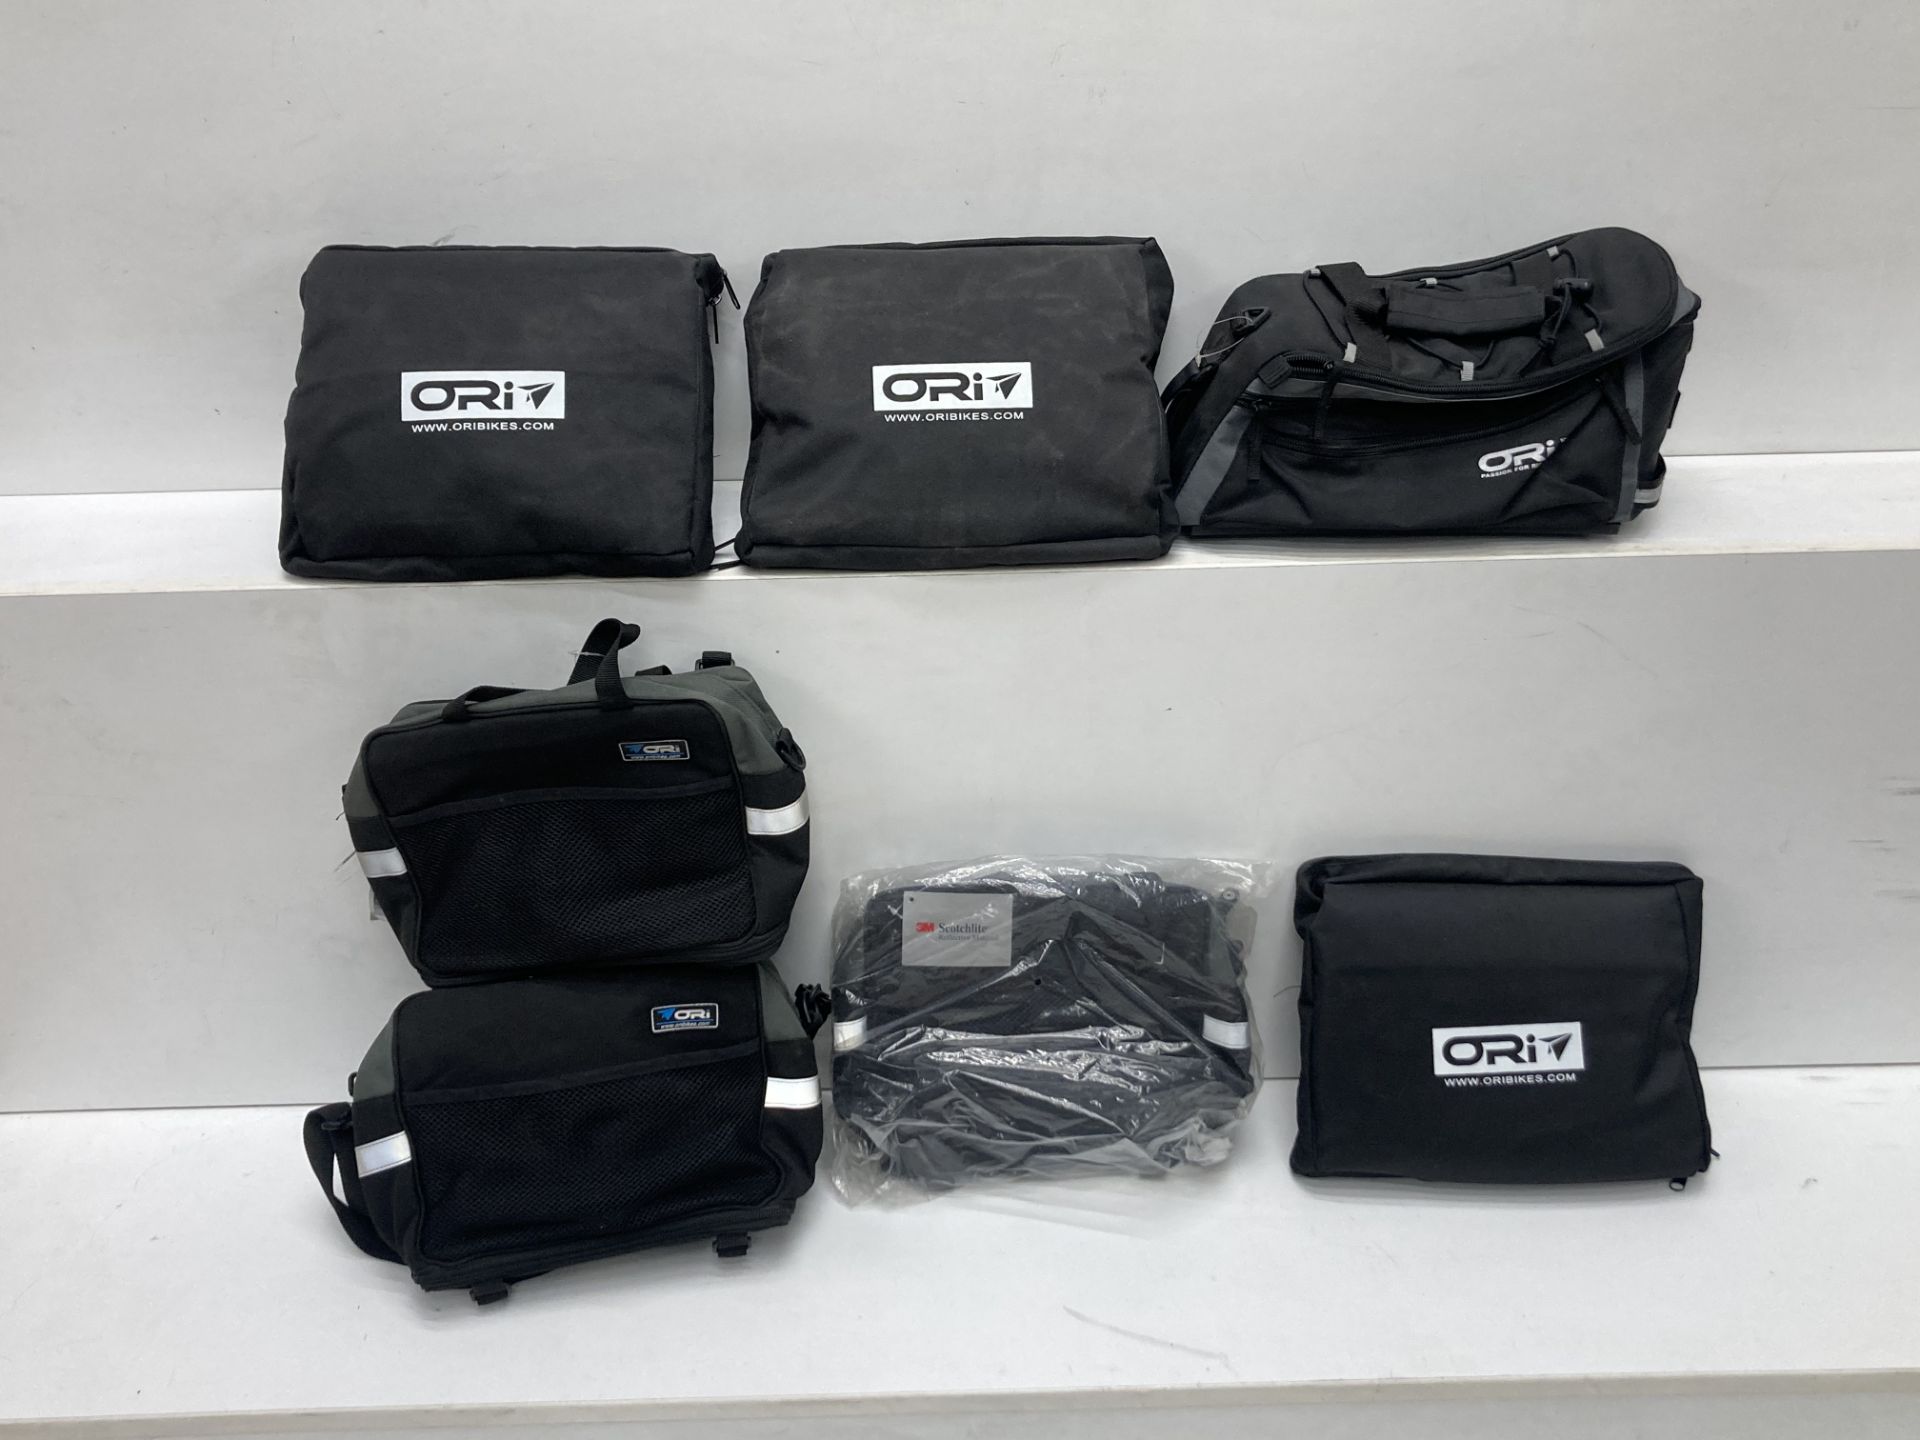 6 x Ori Bikes covers and carry bags, as lotted